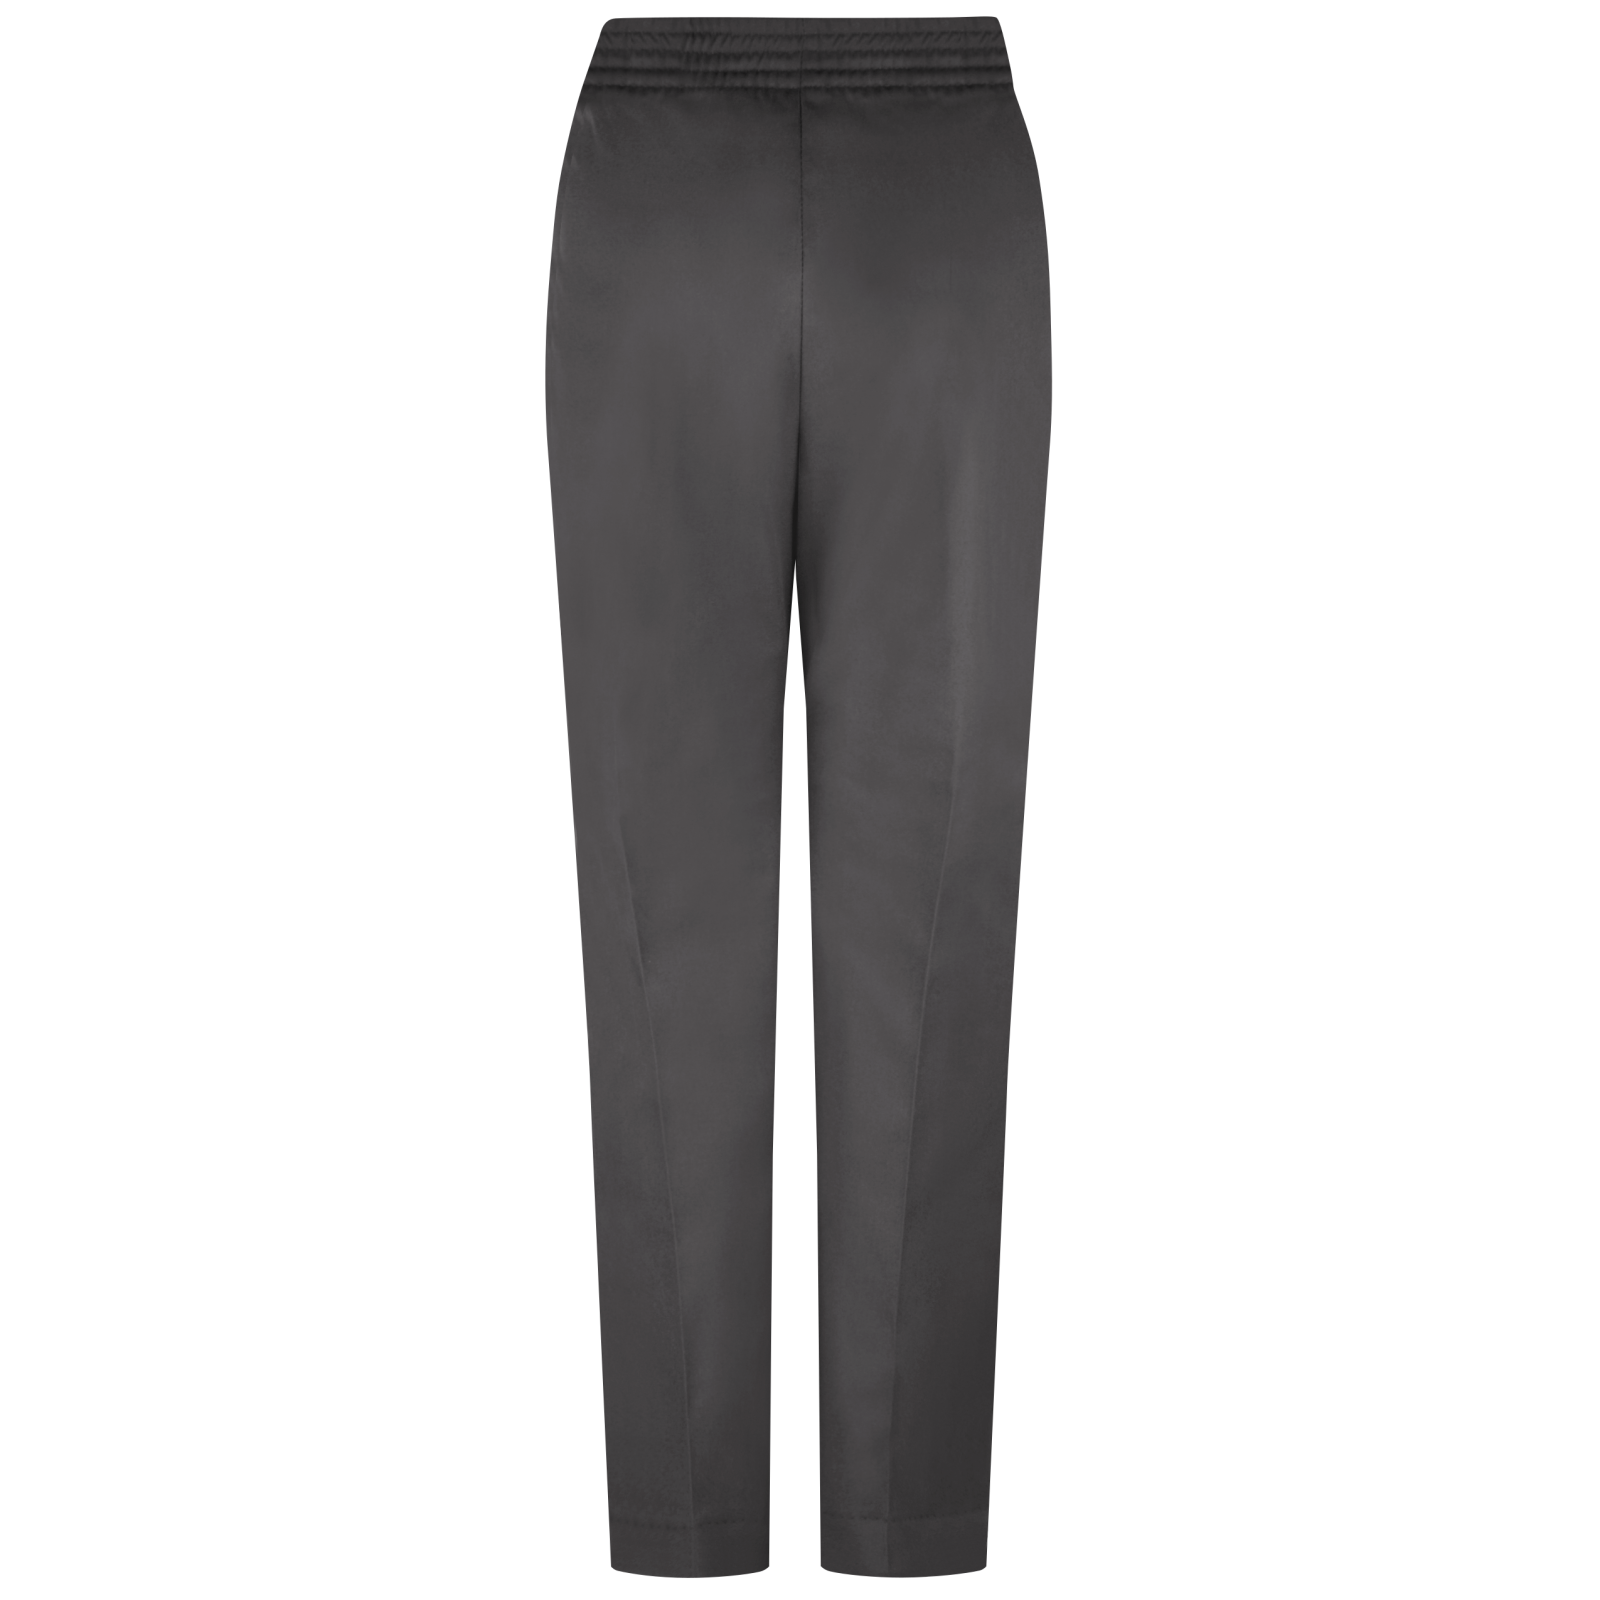 New Ladies Womens Work Trousers Half Elasticated Stretch Waist Office Pants 